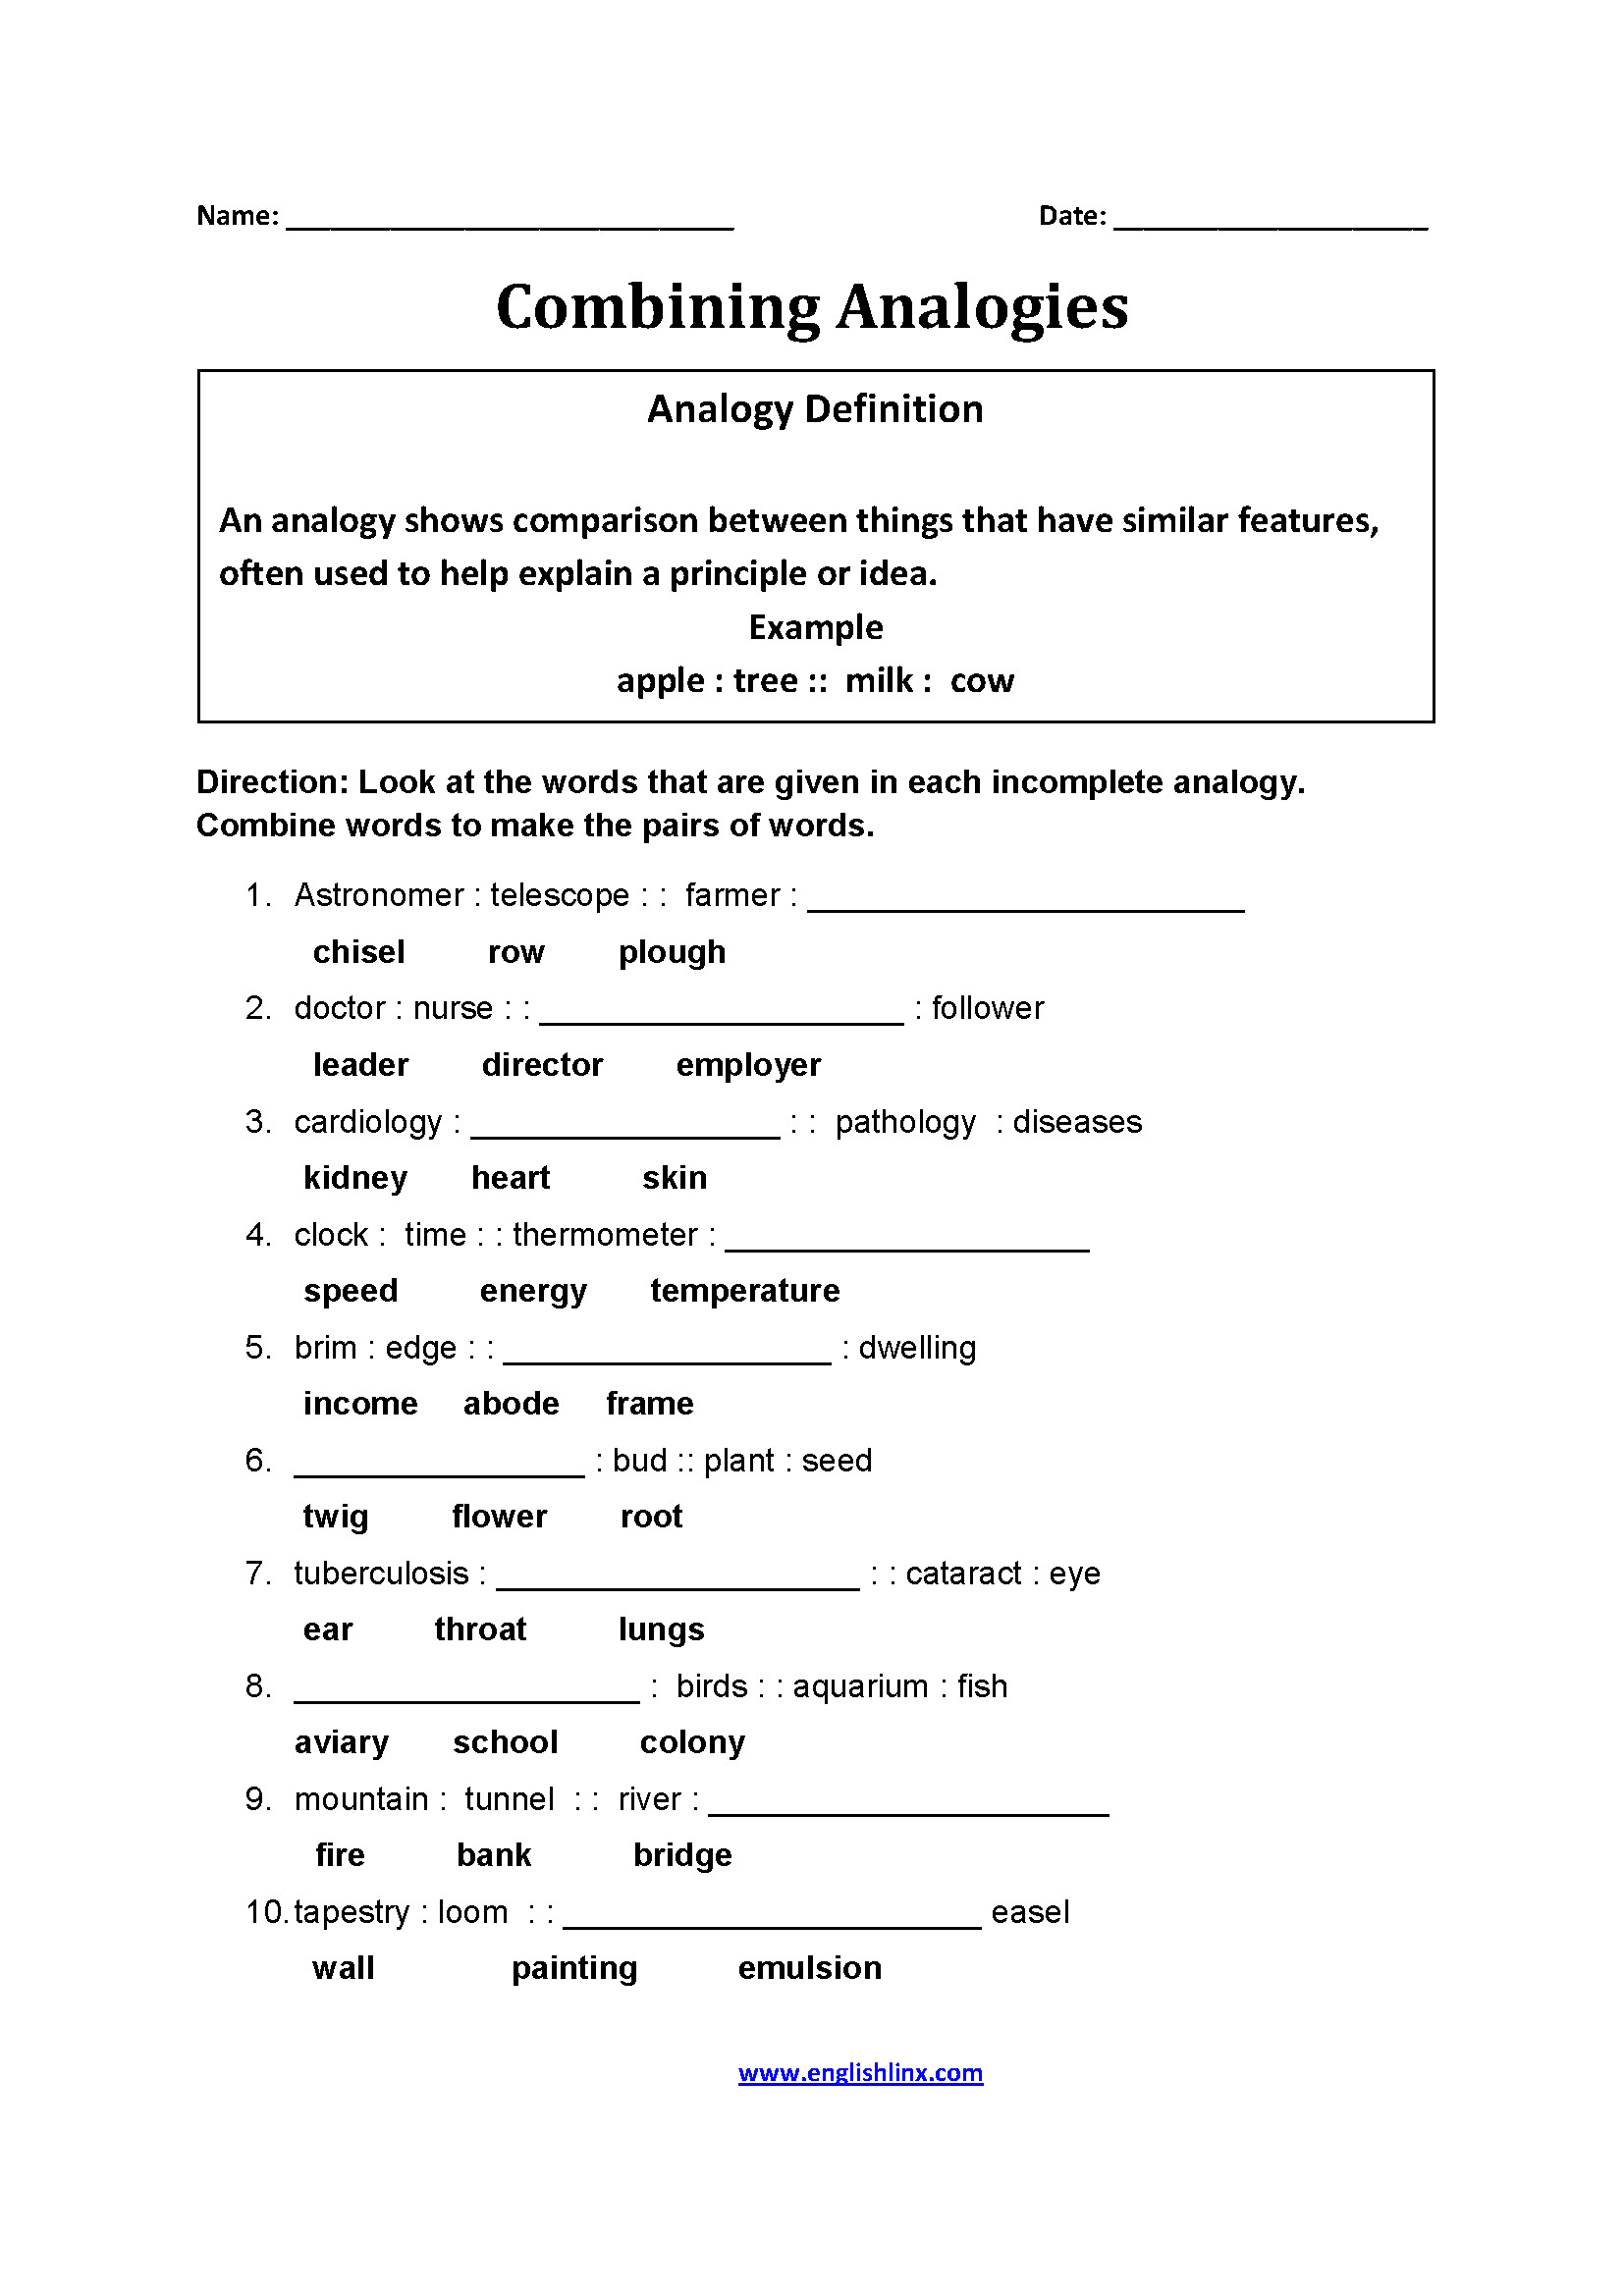 Picture Analogy Worksheets Db excel